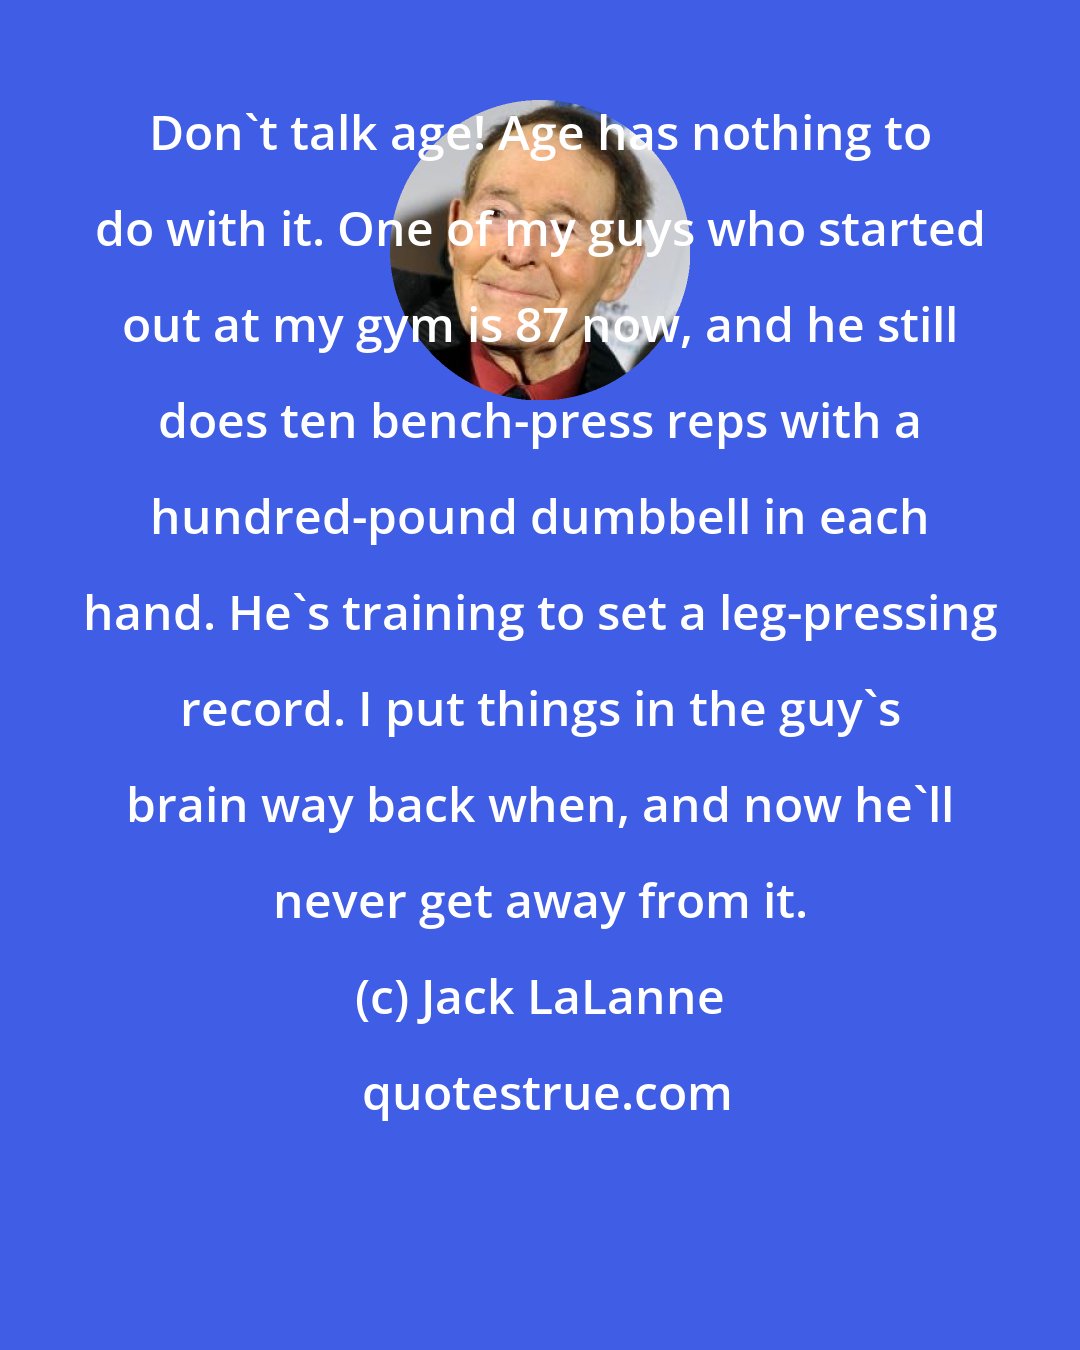 Jack LaLanne: Don't talk age! Age has nothing to do with it. One of my guys who started out at my gym is 87 now, and he still does ten bench-press reps with a hundred-pound dumbbell in each hand. He's training to set a leg-pressing record. I put things in the guy's brain way back when, and now he'll never get away from it.